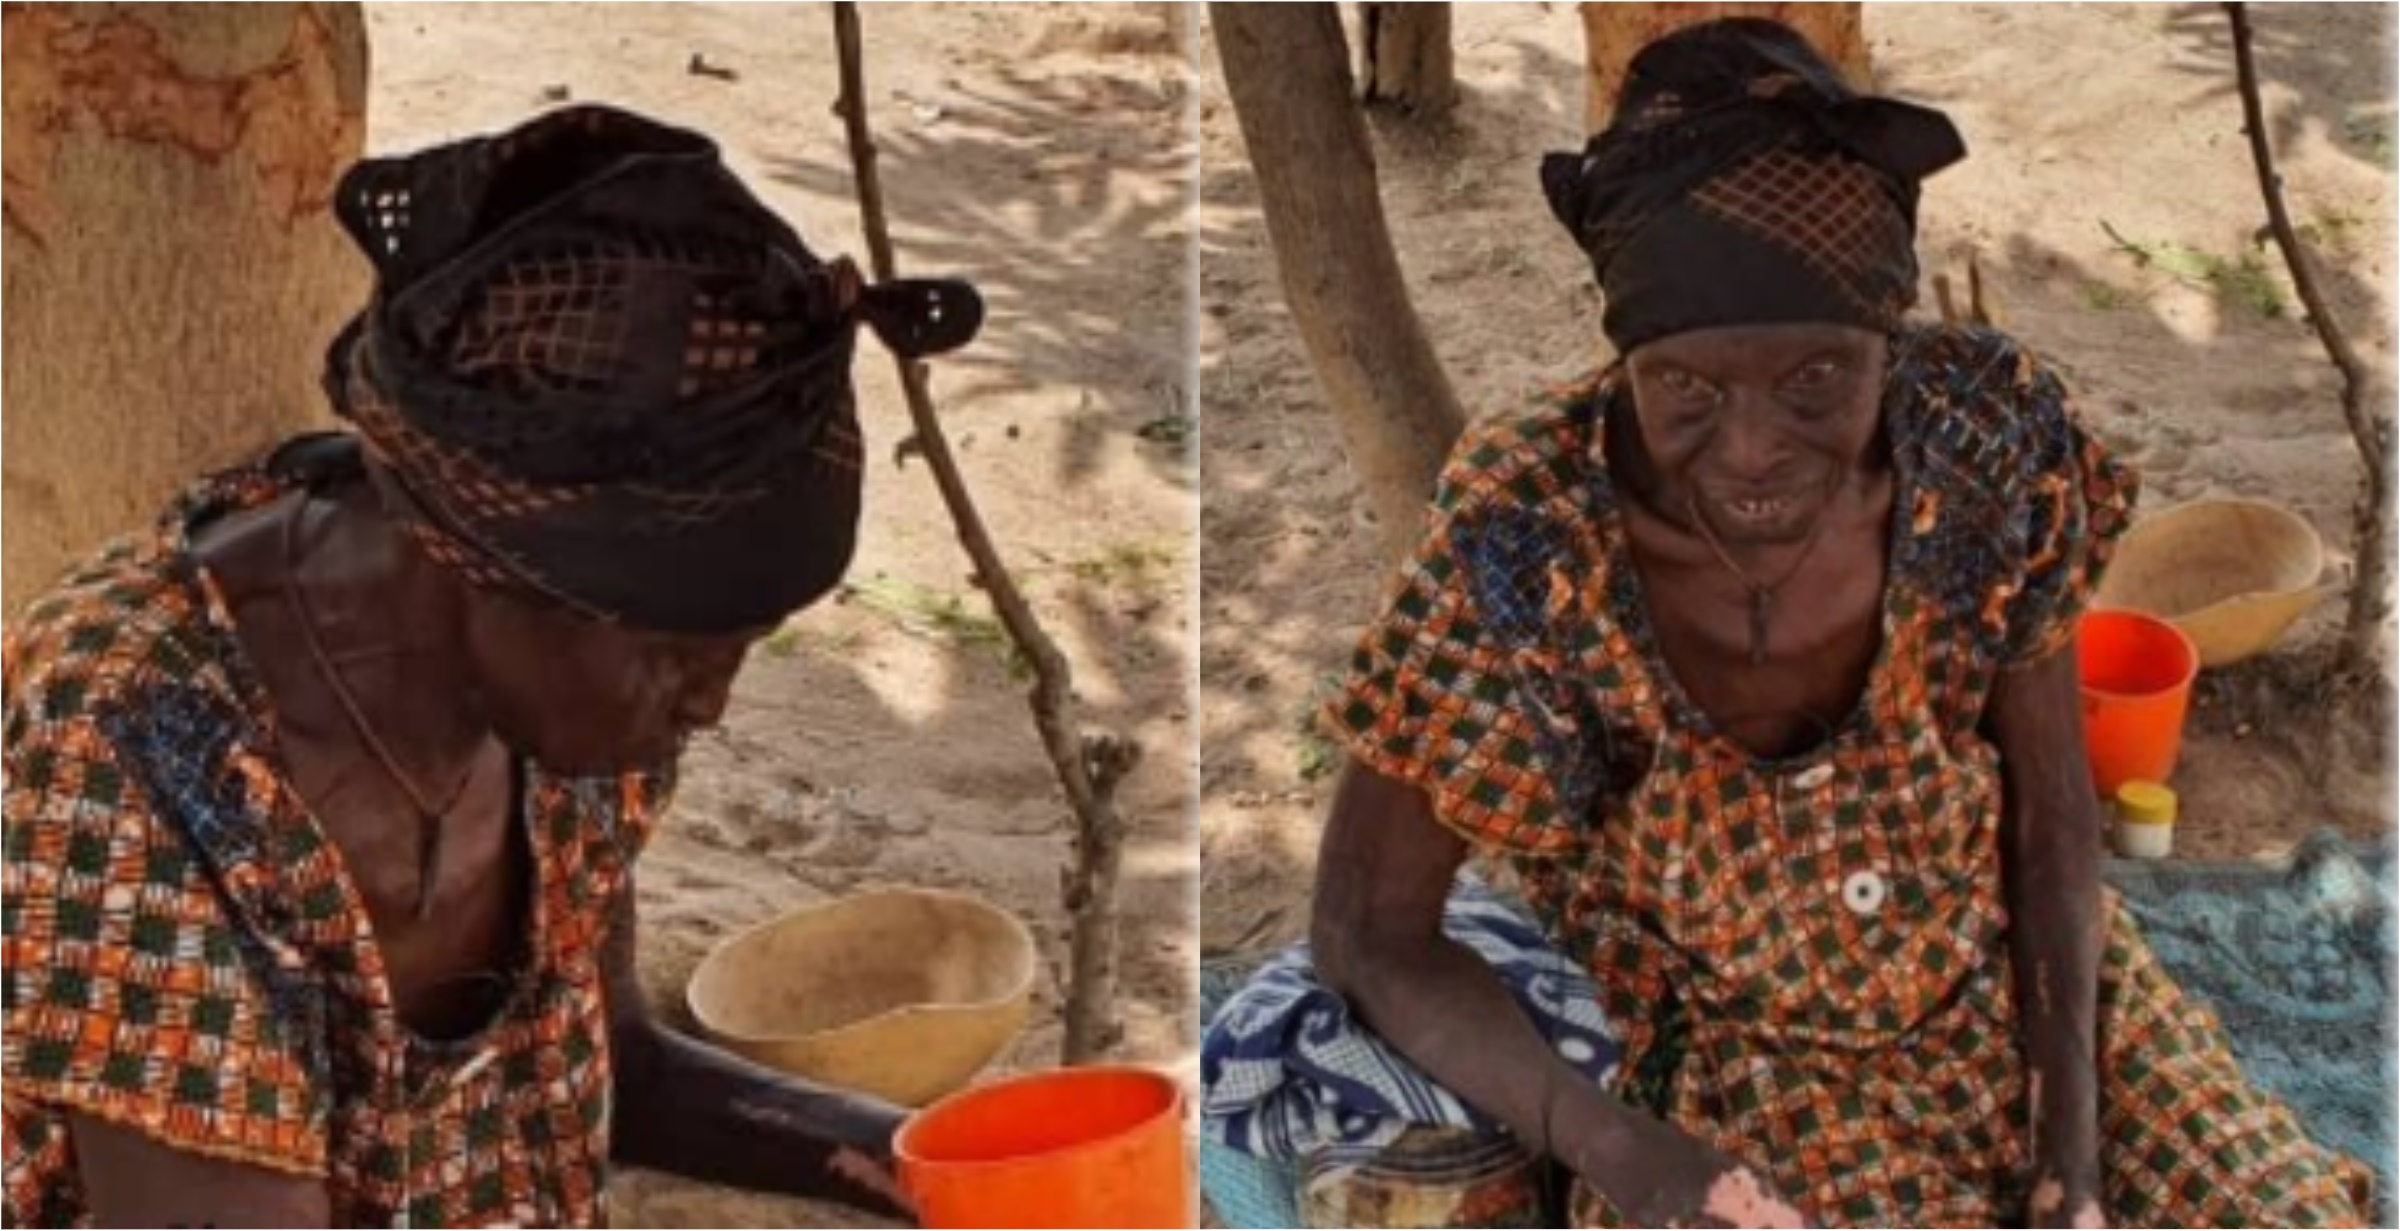 Dari Poga: Bawumia supports abandoned 80-year-old leper with two-bedroom house